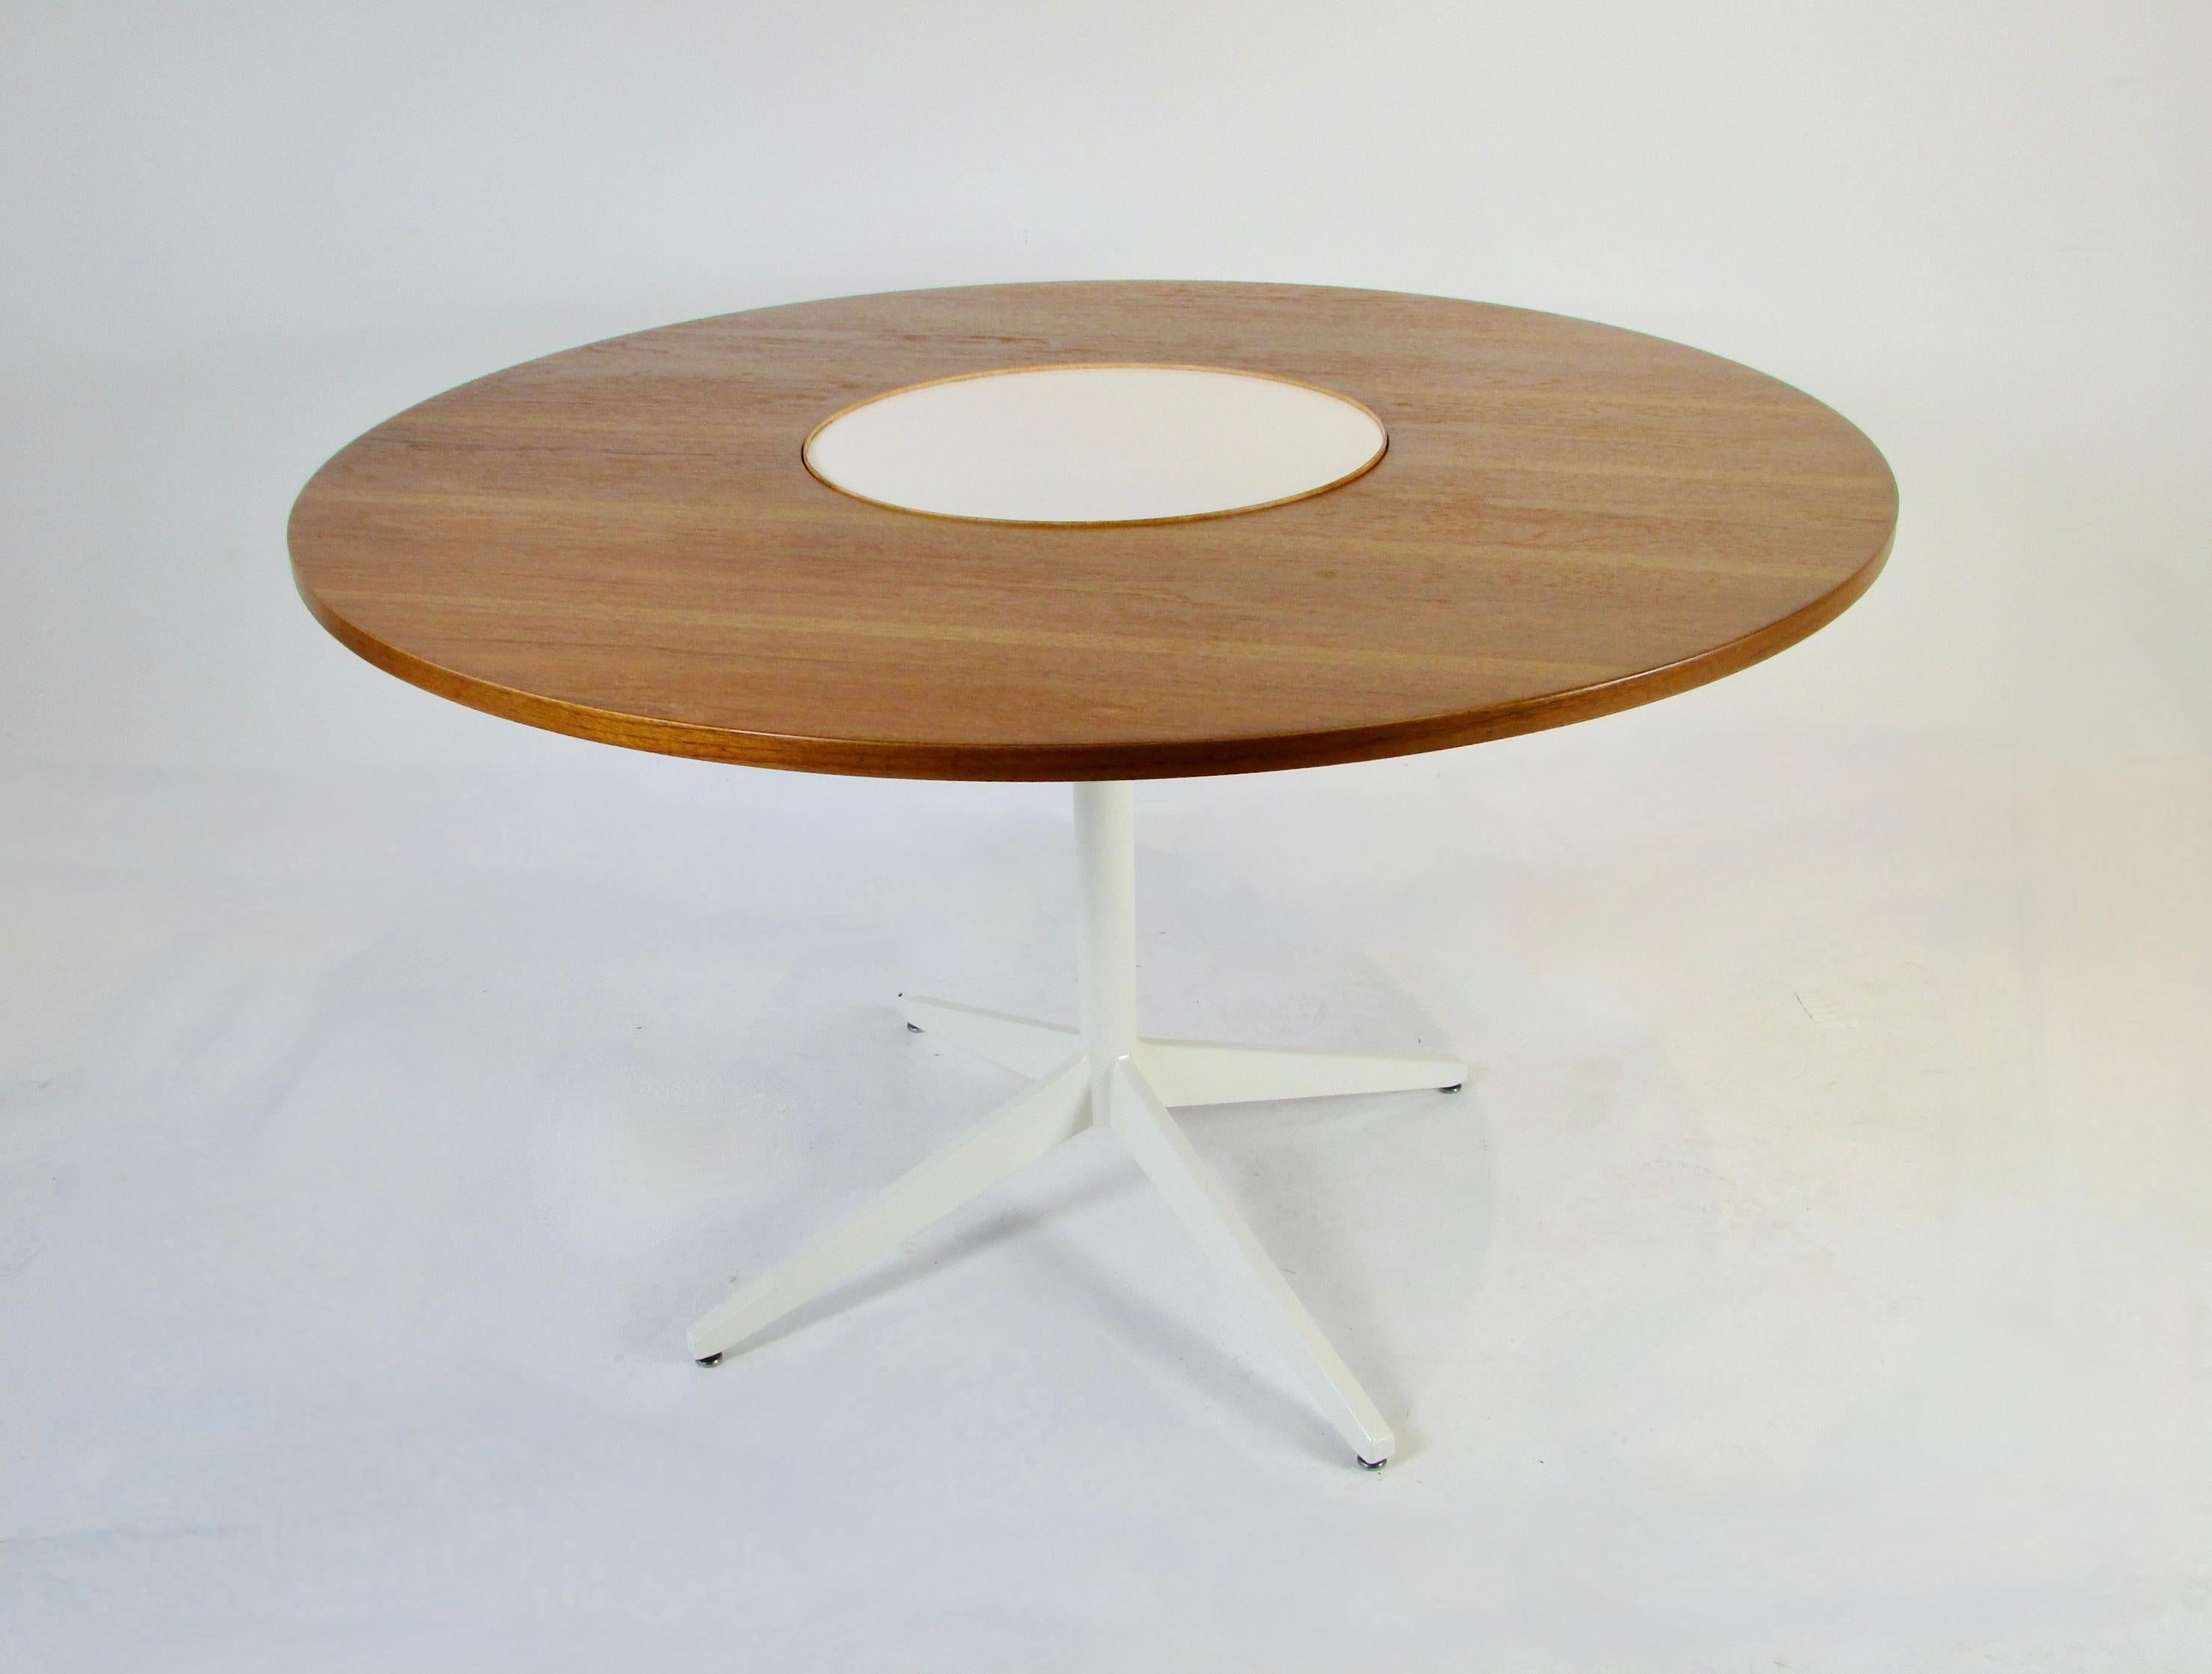 Early and on the rare side. Teak with white laminate lazy susan center dining table. Designed by George Nelson for Herman Miller. The center white laminate area is a rotating lazy susan makes for fun serving. This is the only example I have ever